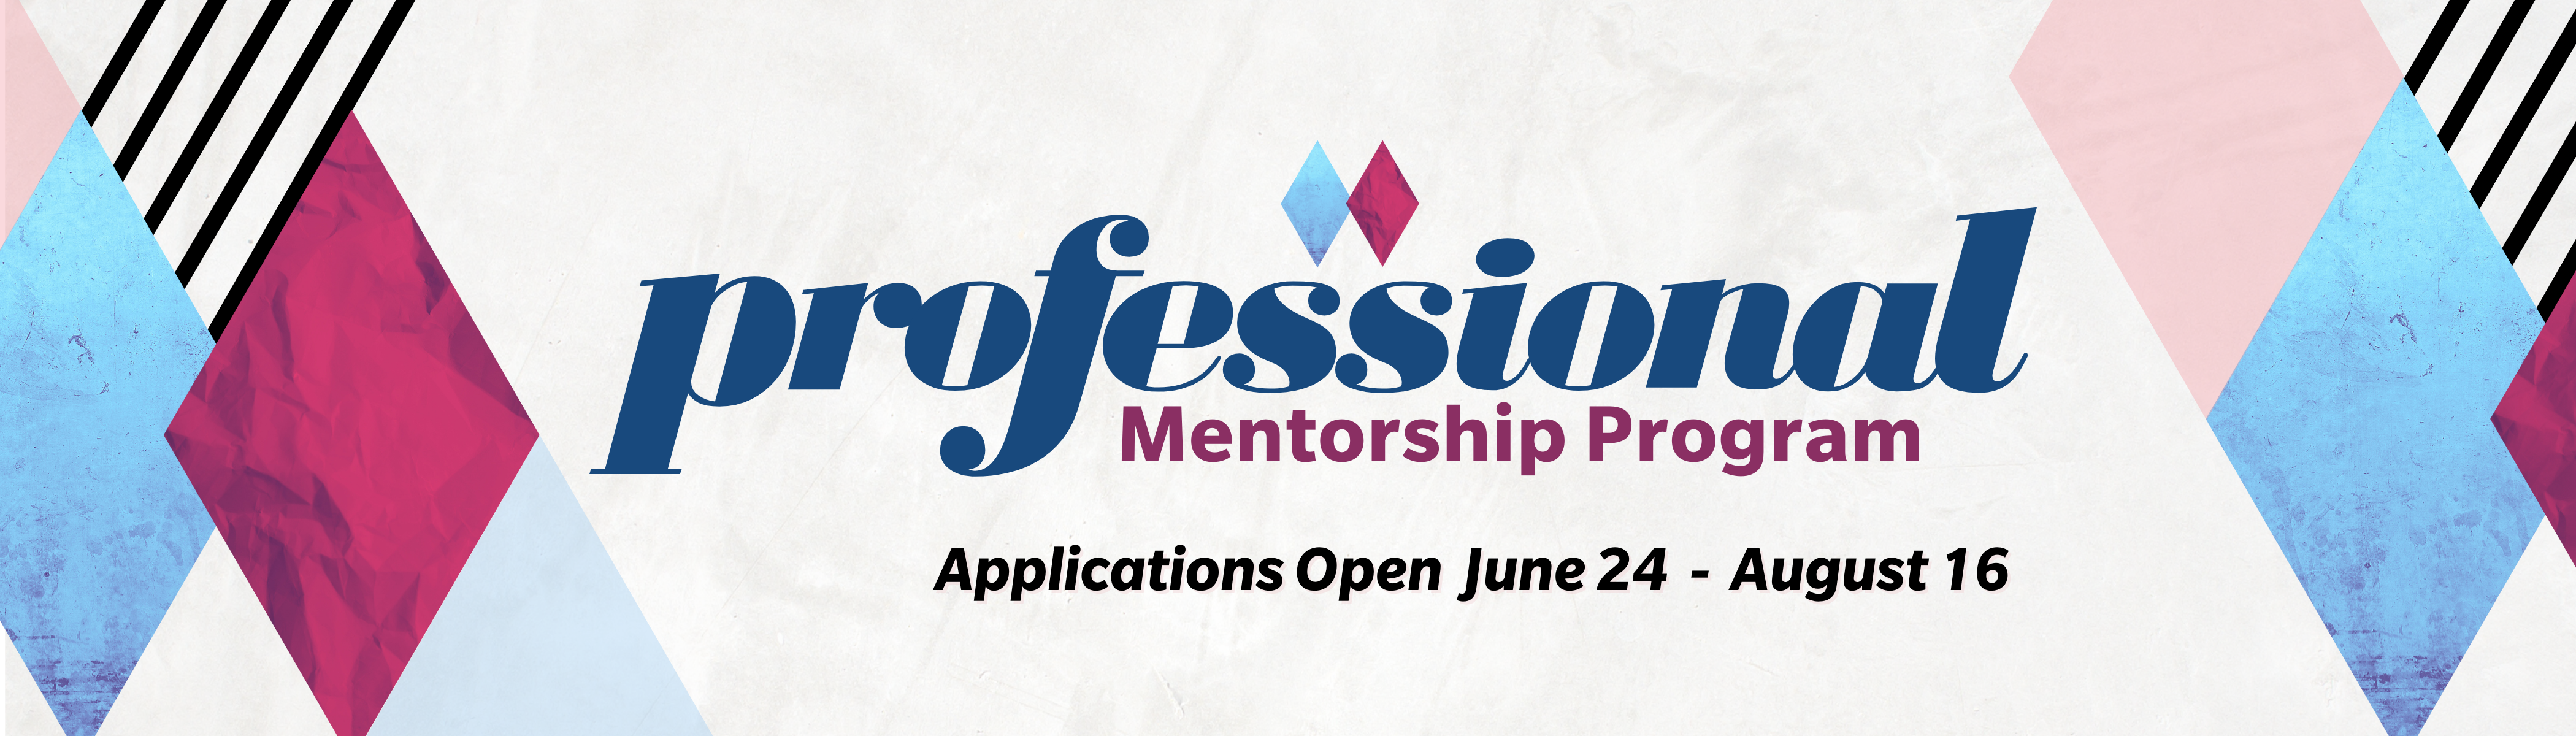 Graphic with diamonds and text "Professional Mentorship Program - Applications Open June 24 - August 16"